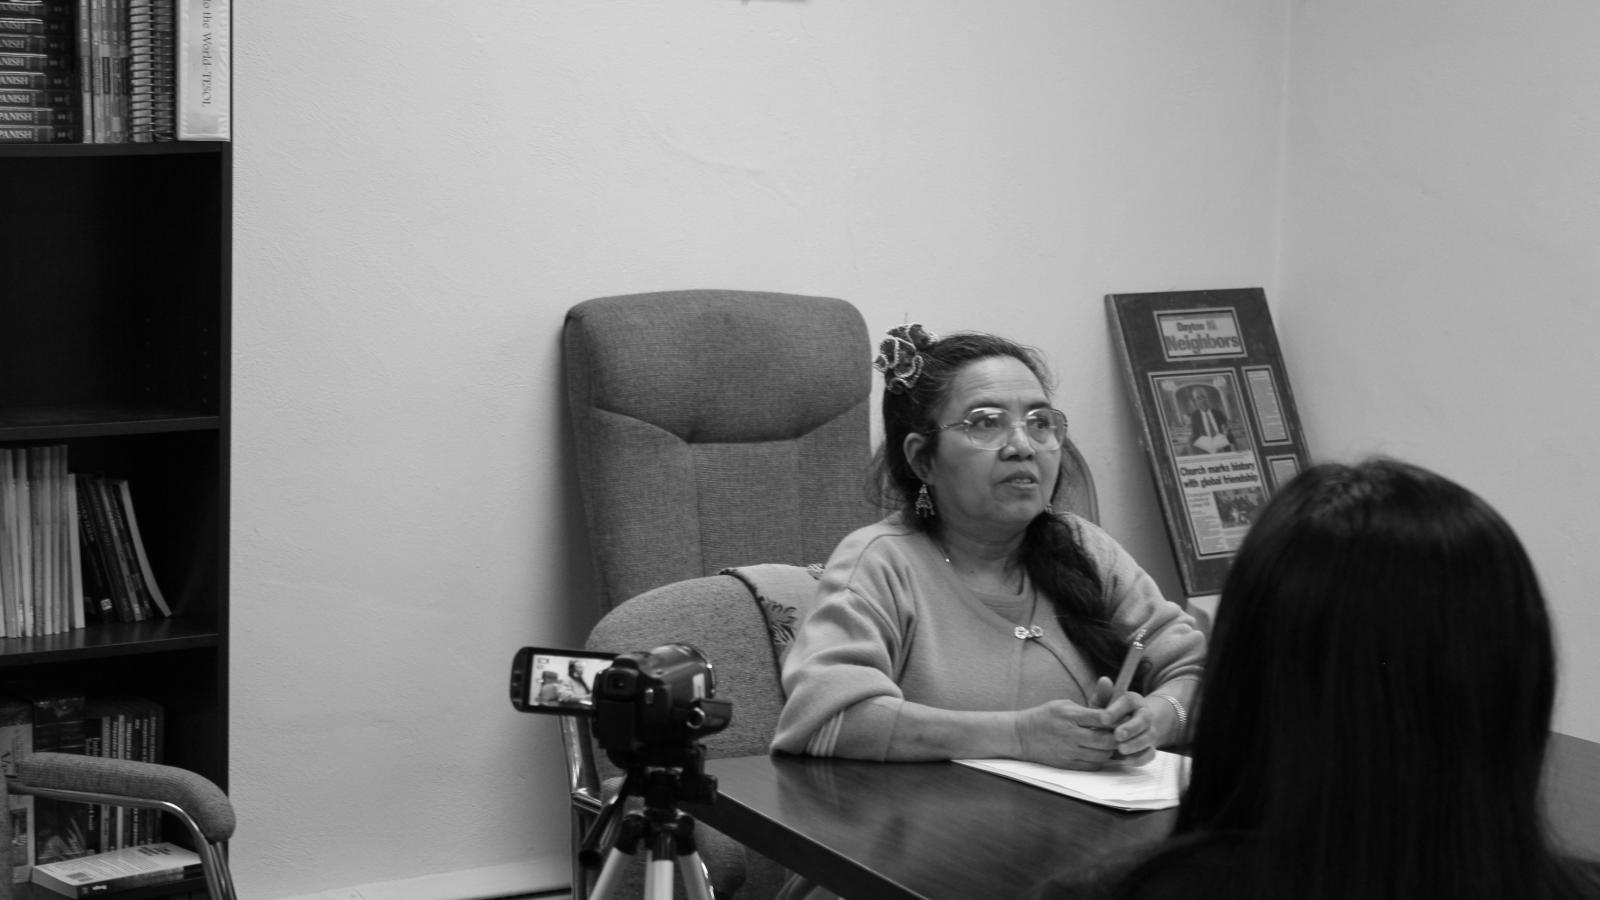 Doña Filomena during her interview